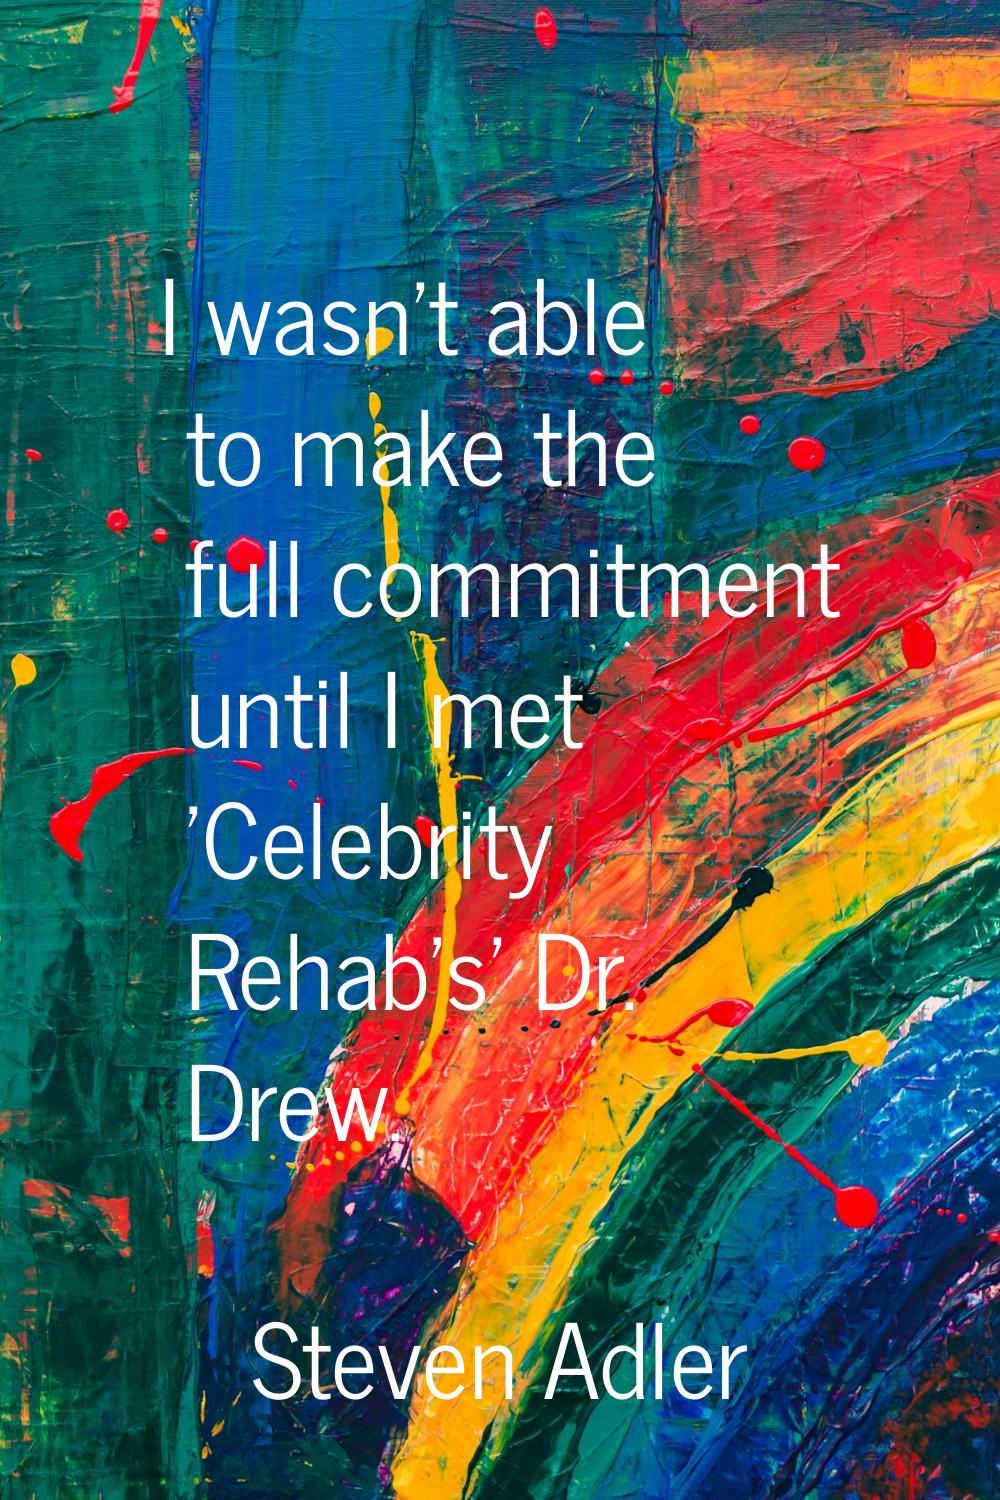 I wasn't able to make the full commitment until I met 'Celebrity Rehab's' Dr. Drew.